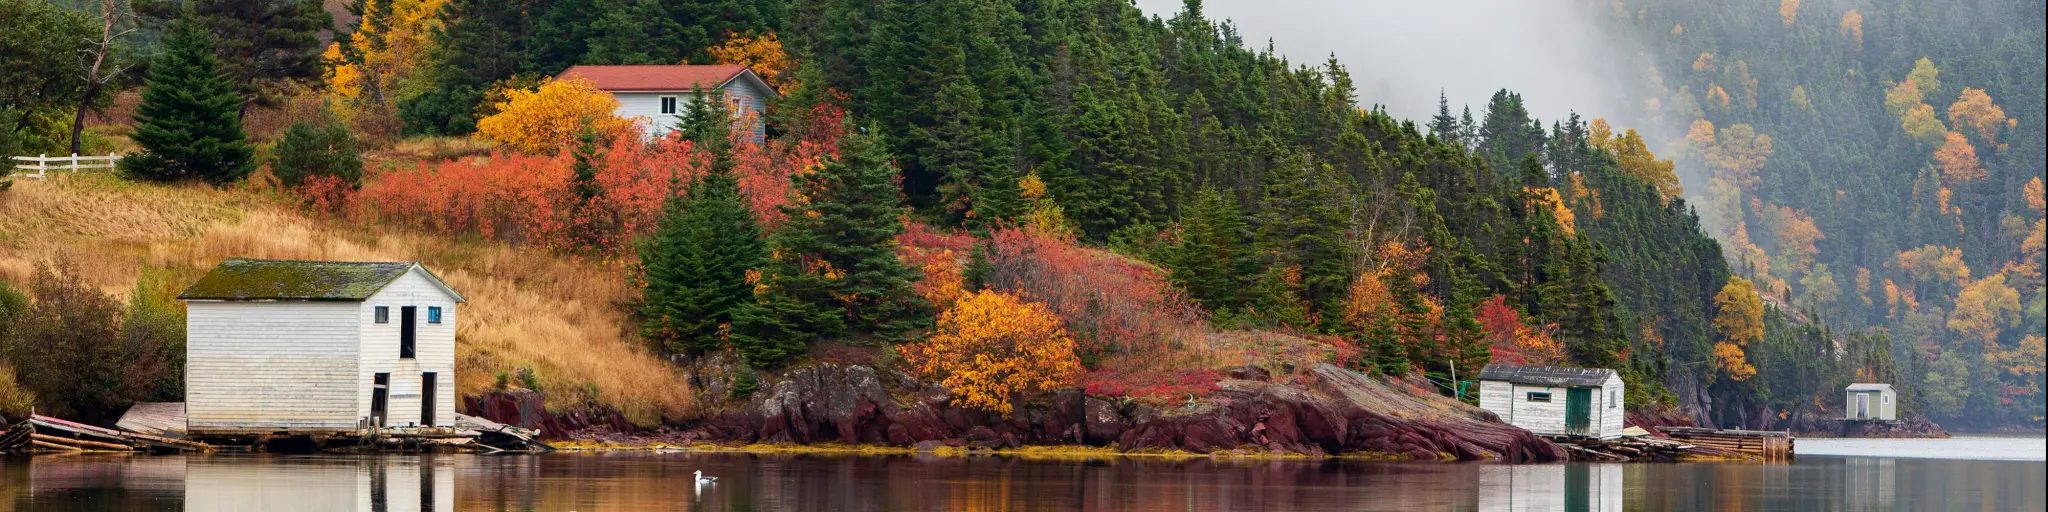 Tranquil autumn morning in Trinity Bay, Newfoundland and Labrador, Canada.